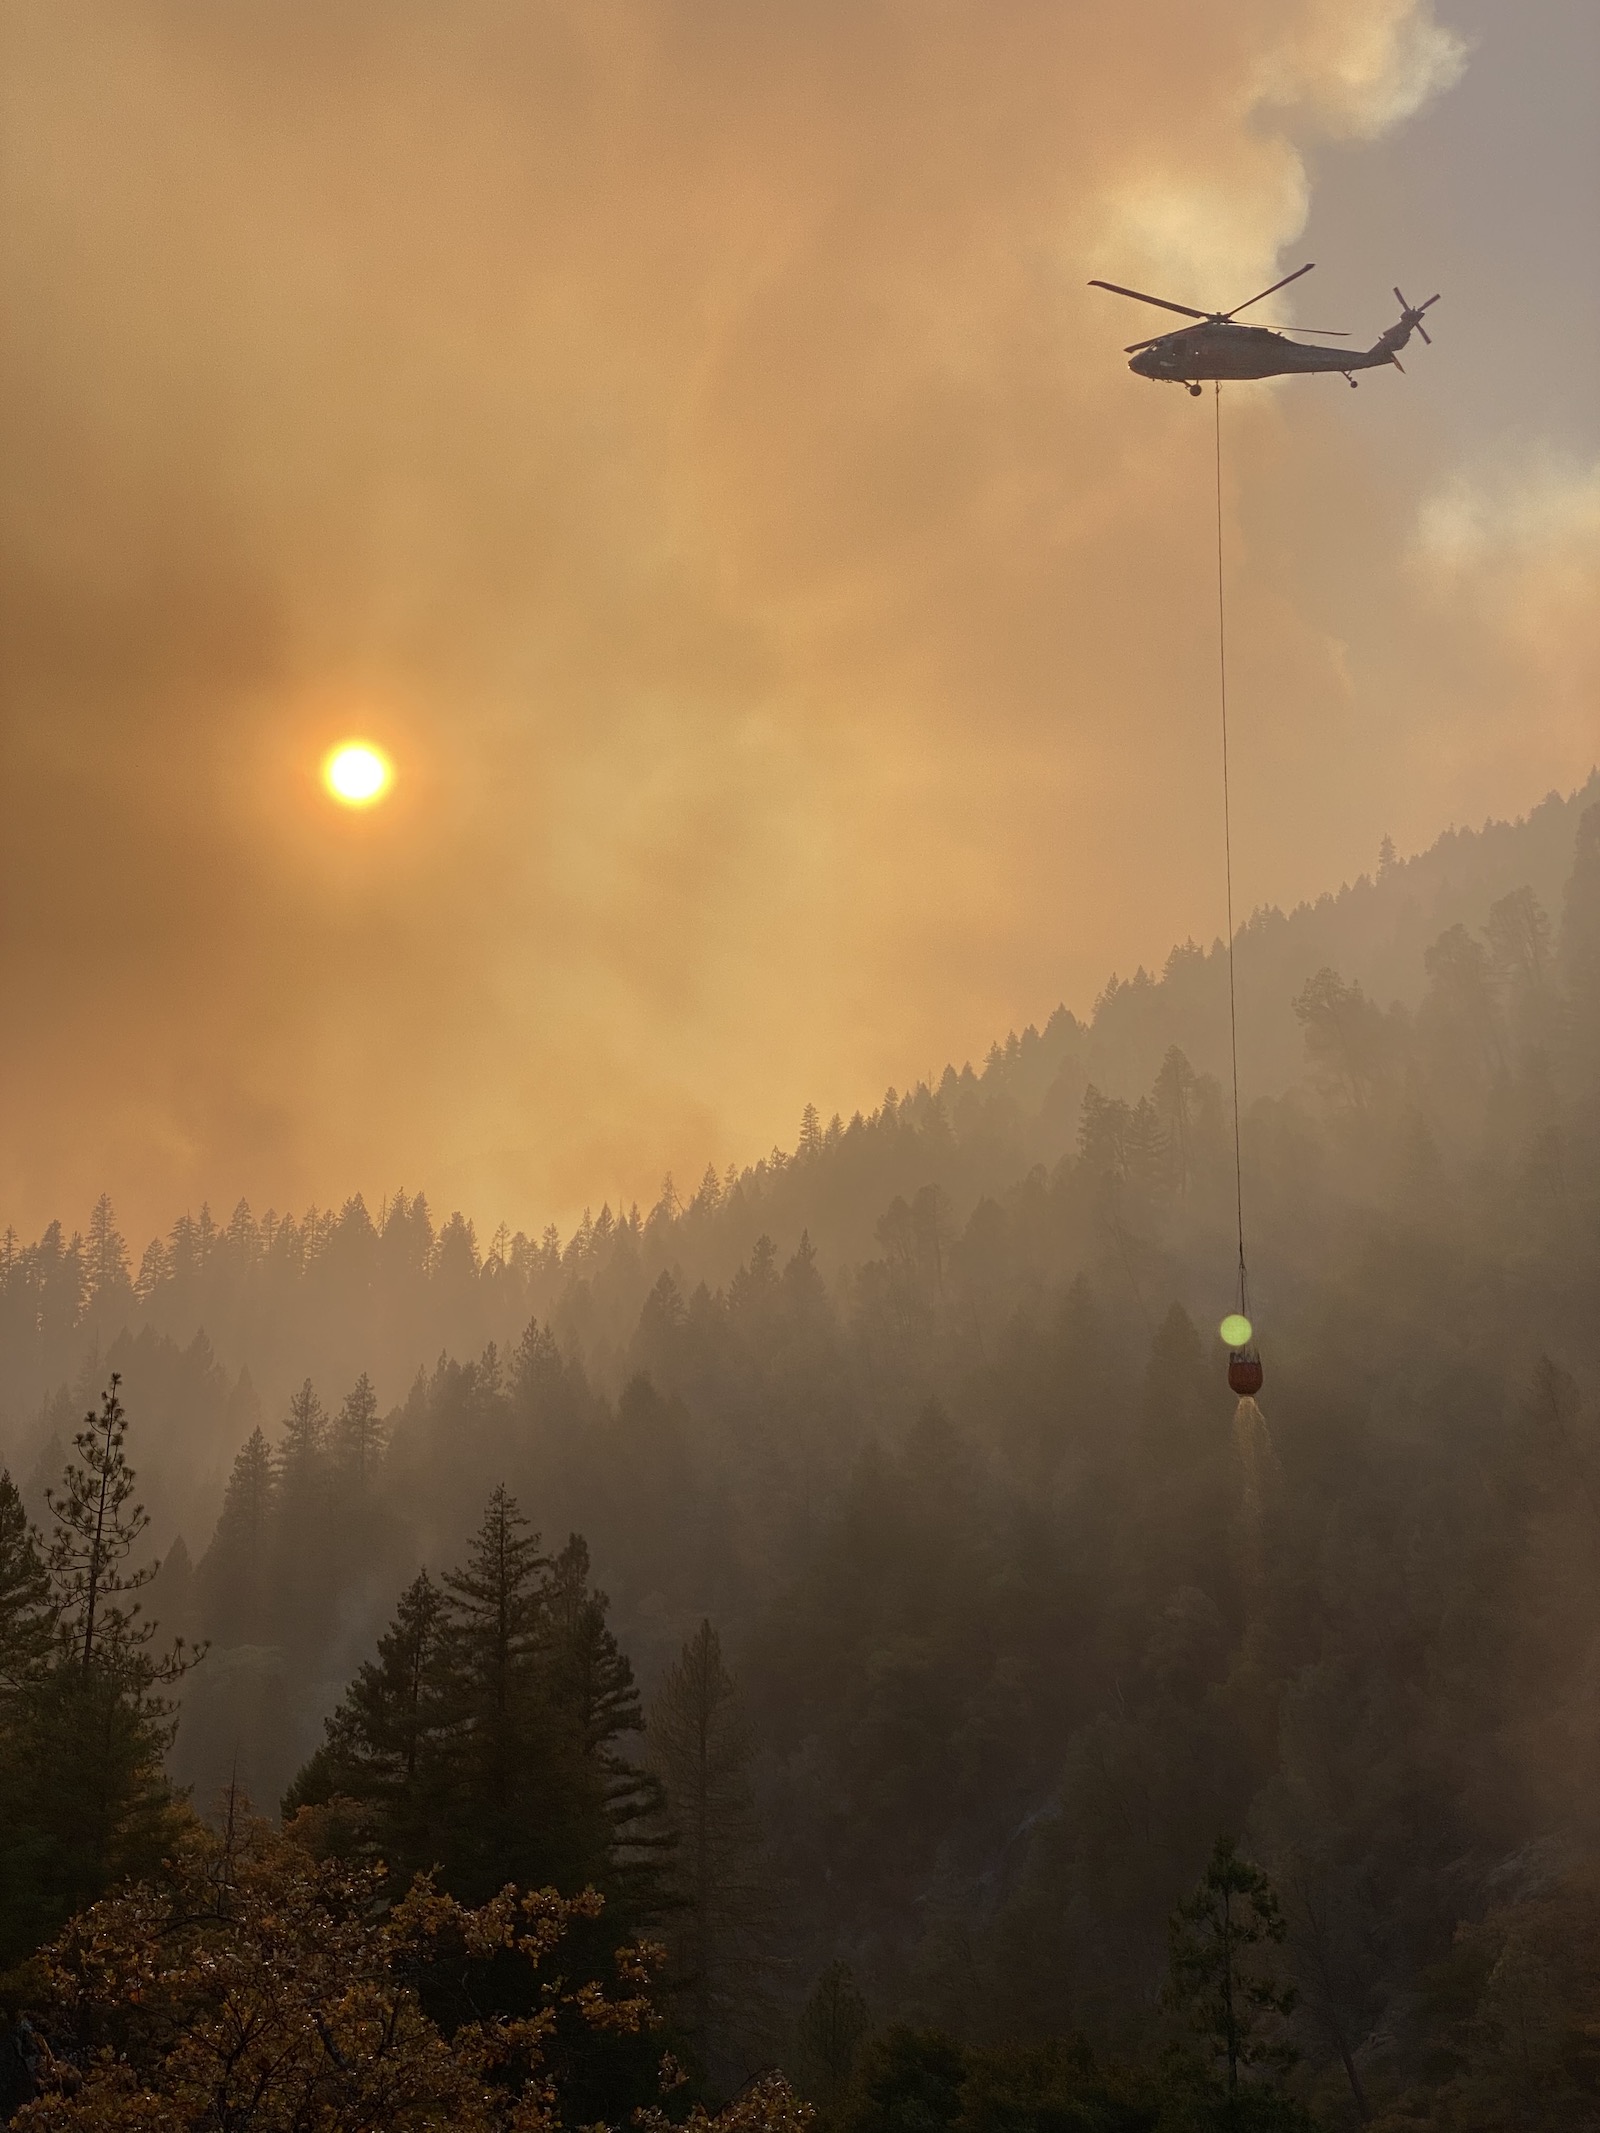 a smoky daytime scene of a helicopter hovering over a forrested river area